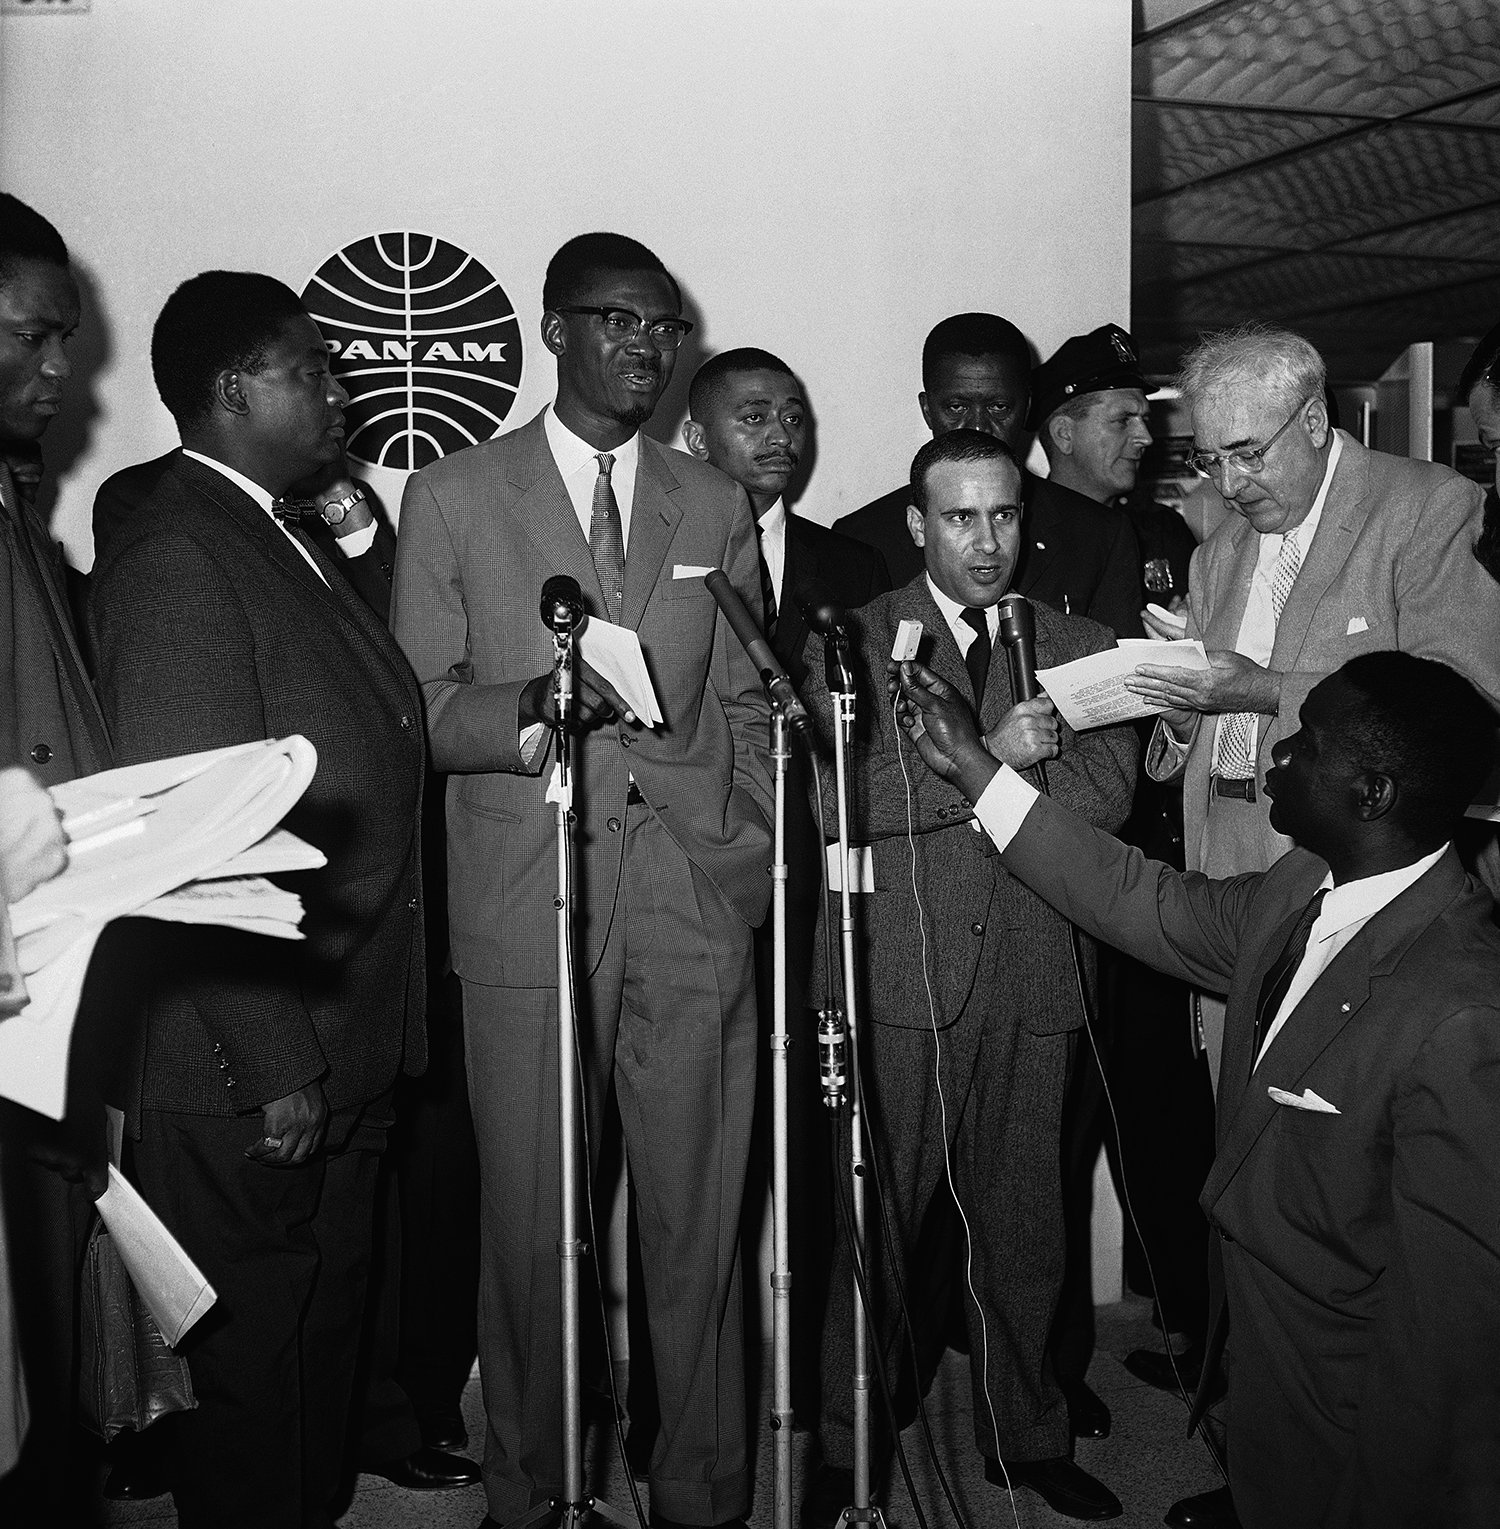  Prime Minister Patrice Lumumba of the Republic of the Congo, makes a statement to broadcasters and reporters at New York's Idlewild Airport on Aug. 2, 1960, before flying to London. (AP Photo/John Rooney) 